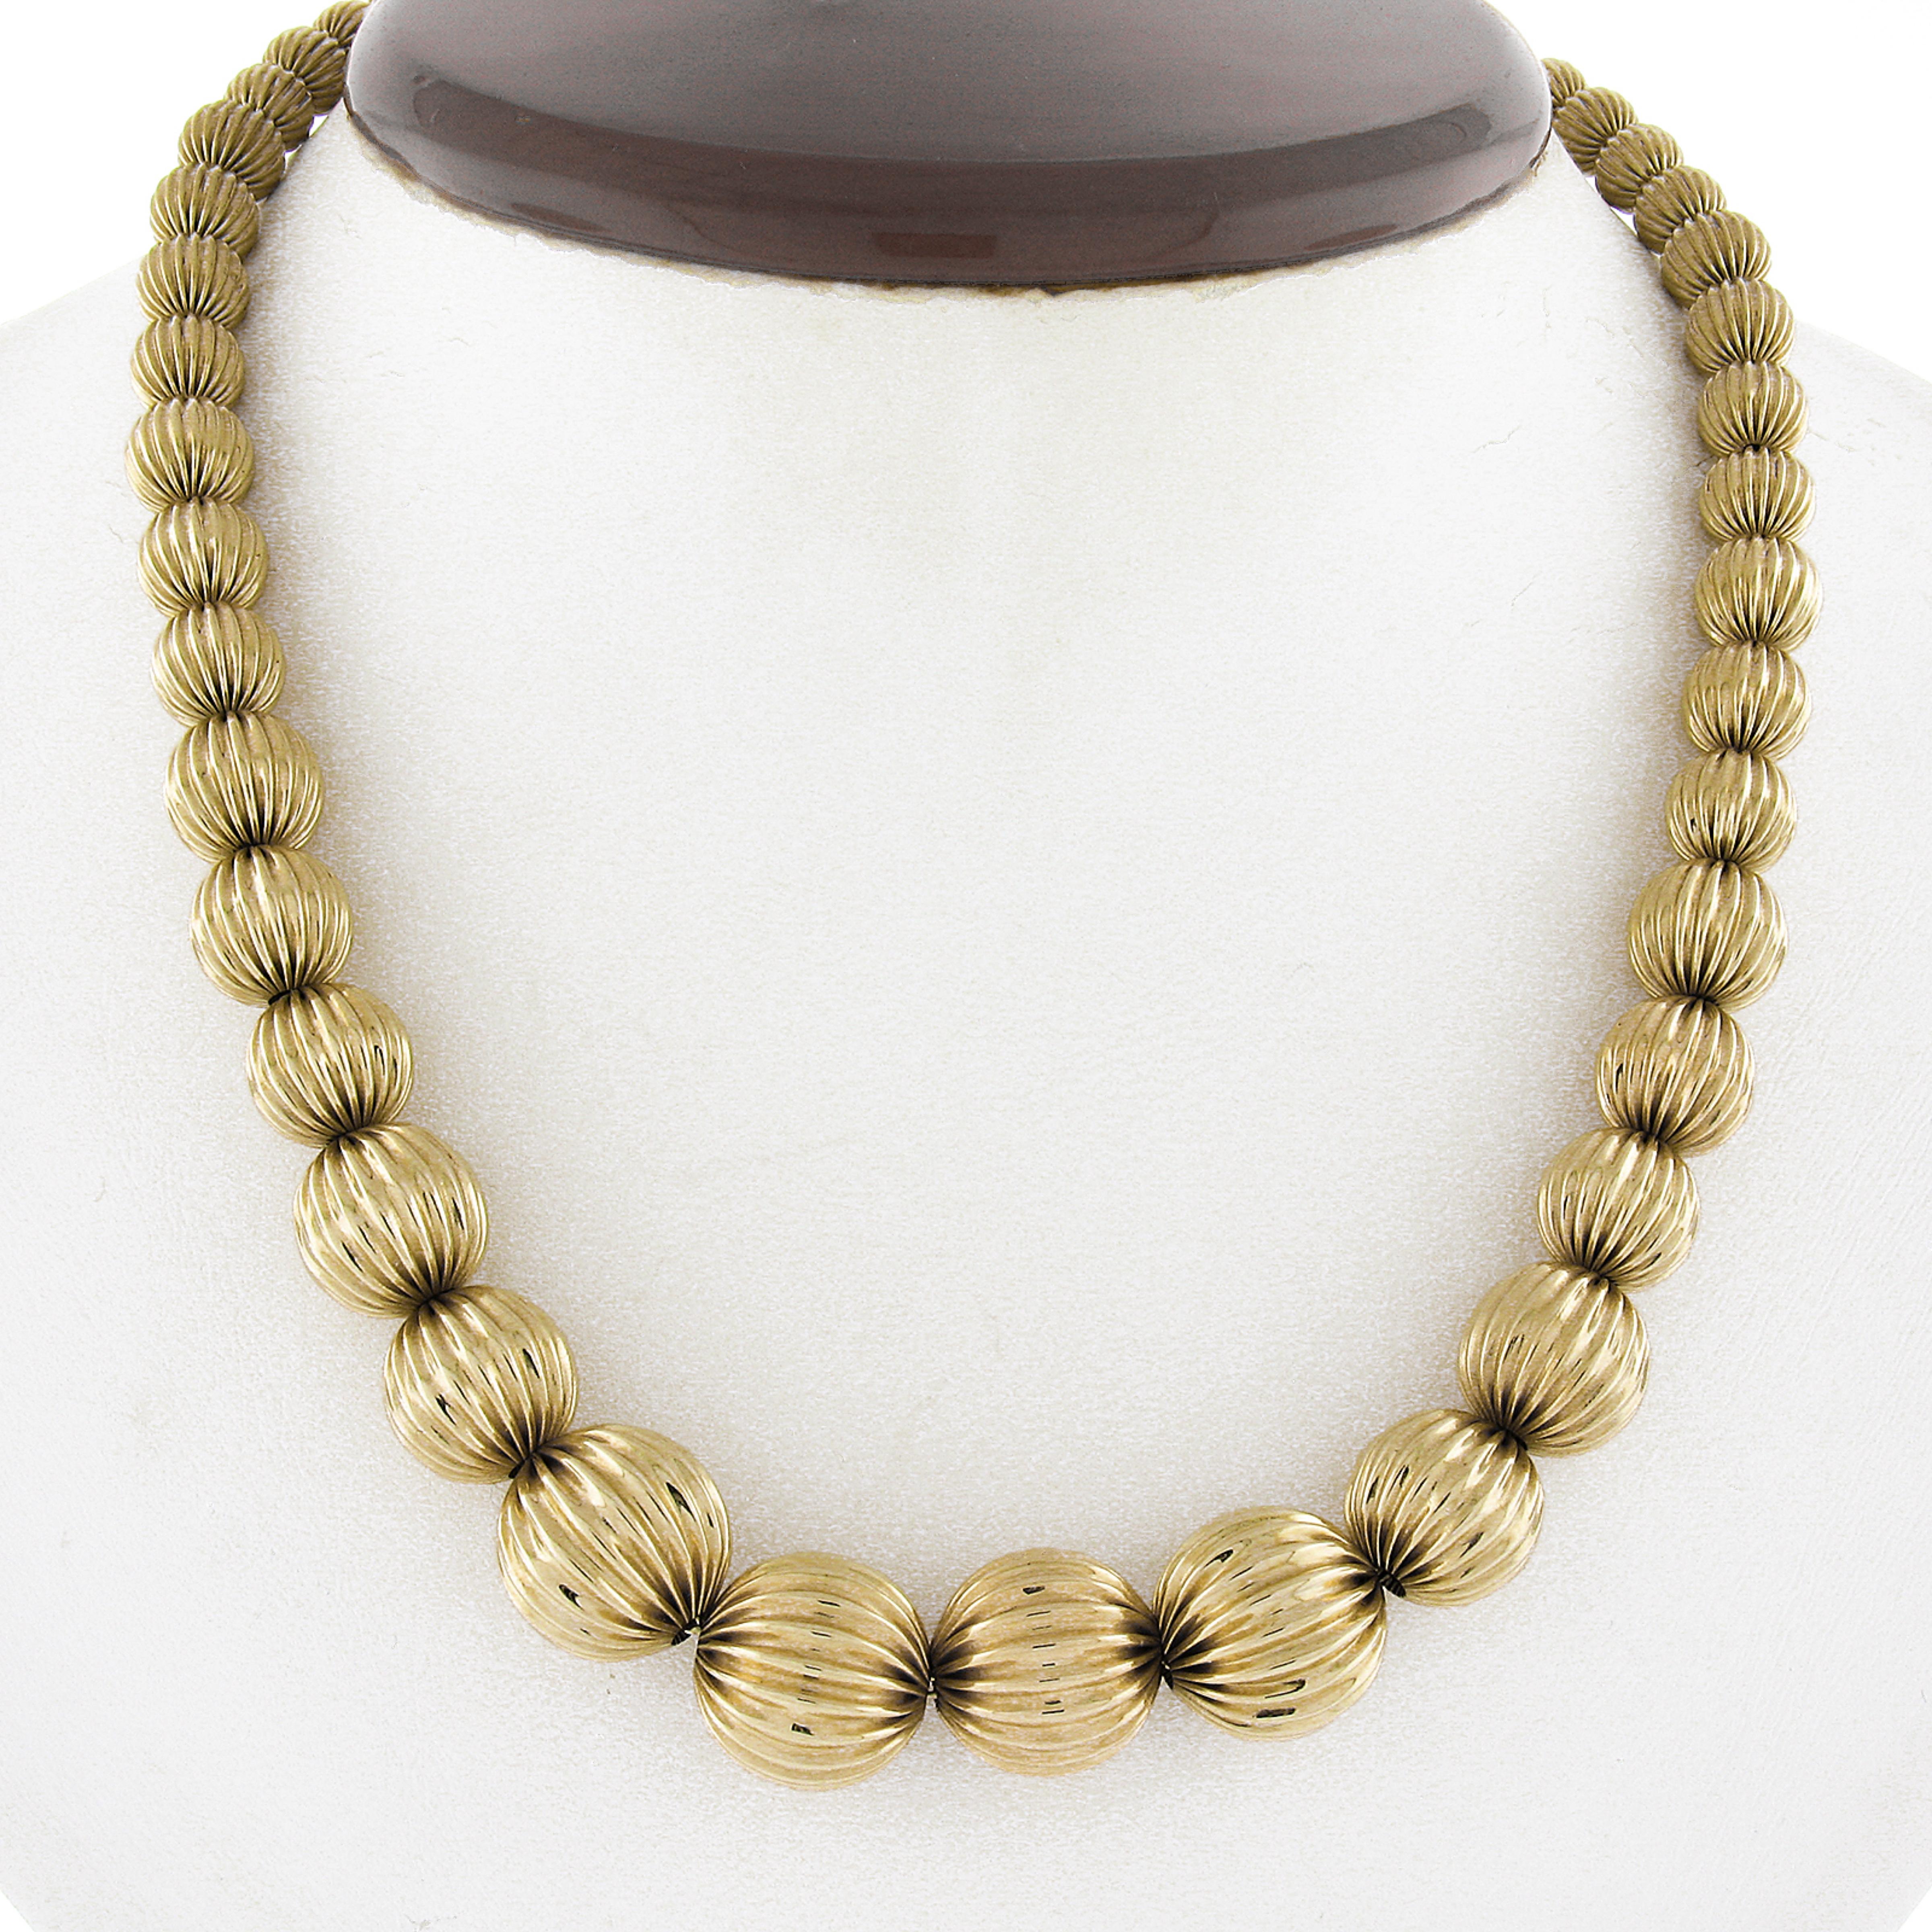 Material: Solid 14k Yellow Gold 
Weight: 21.87 Grams
Chain Type: Graduated Grooved Bead Gold on Cable Link Chain
Length: 16 Inches (measured next to a ruler)
Width: Graduated from 5.9mm to 13.1mm 
Clasp: Hook w/ Push Clasp
Condition: Excellent